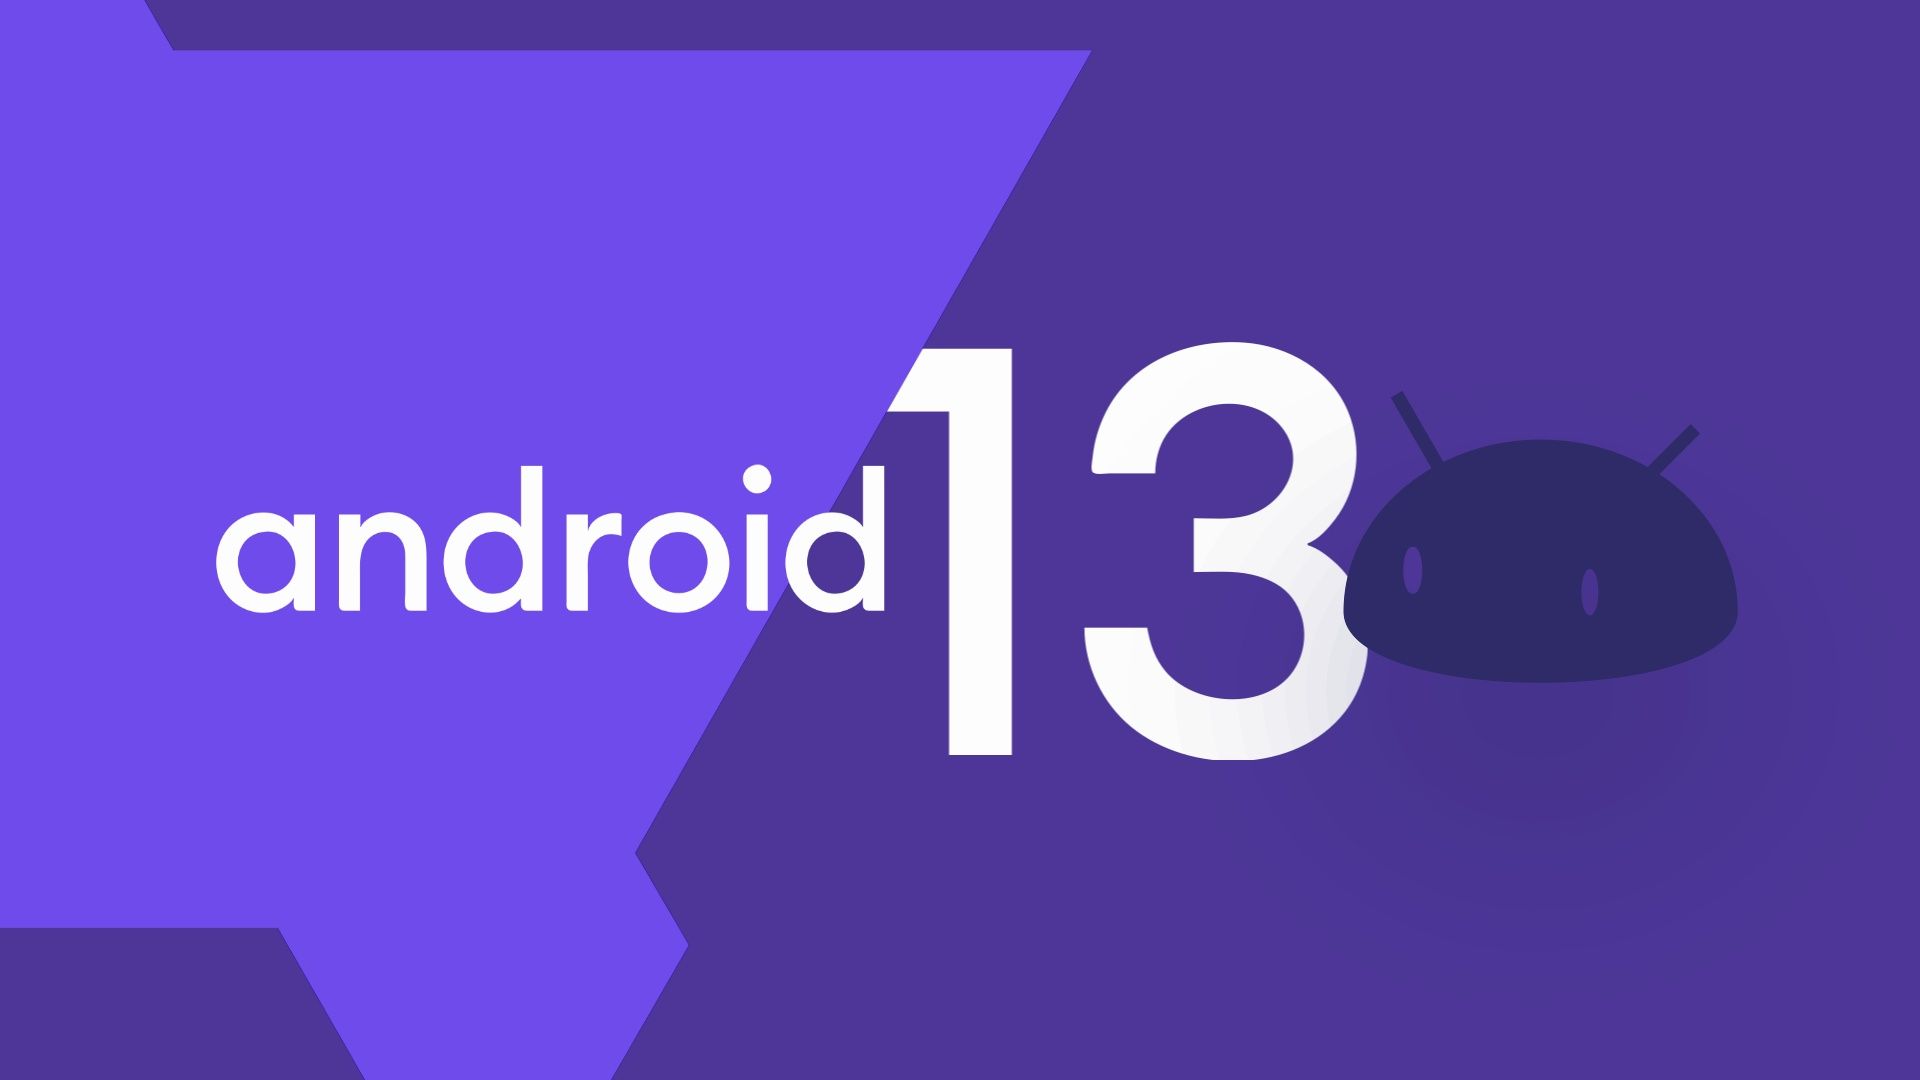 The Android 13 logo against a purple background